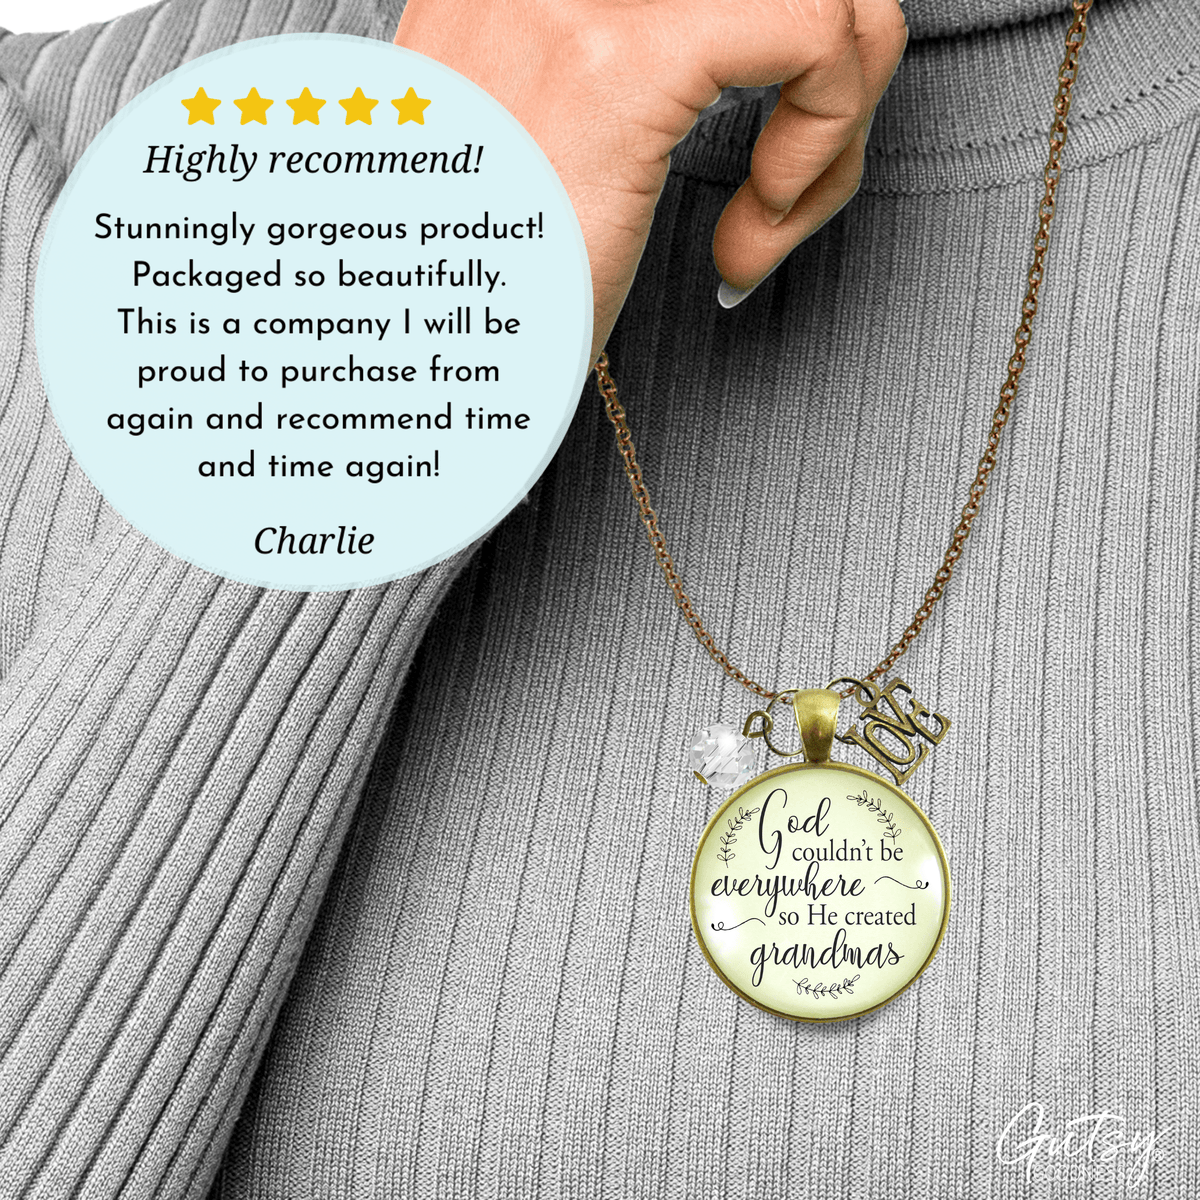 Gutsy Goodness Blessed Grandma Necklace God Couldn't Be Everywhere Christian Jewelry - Gutsy Goodness Handmade Jewelry;Blessed Grandma Necklace God Couldn't Be Everywhere Christian Jewelry - Gutsy Goodness Handmade Jewelry Gifts